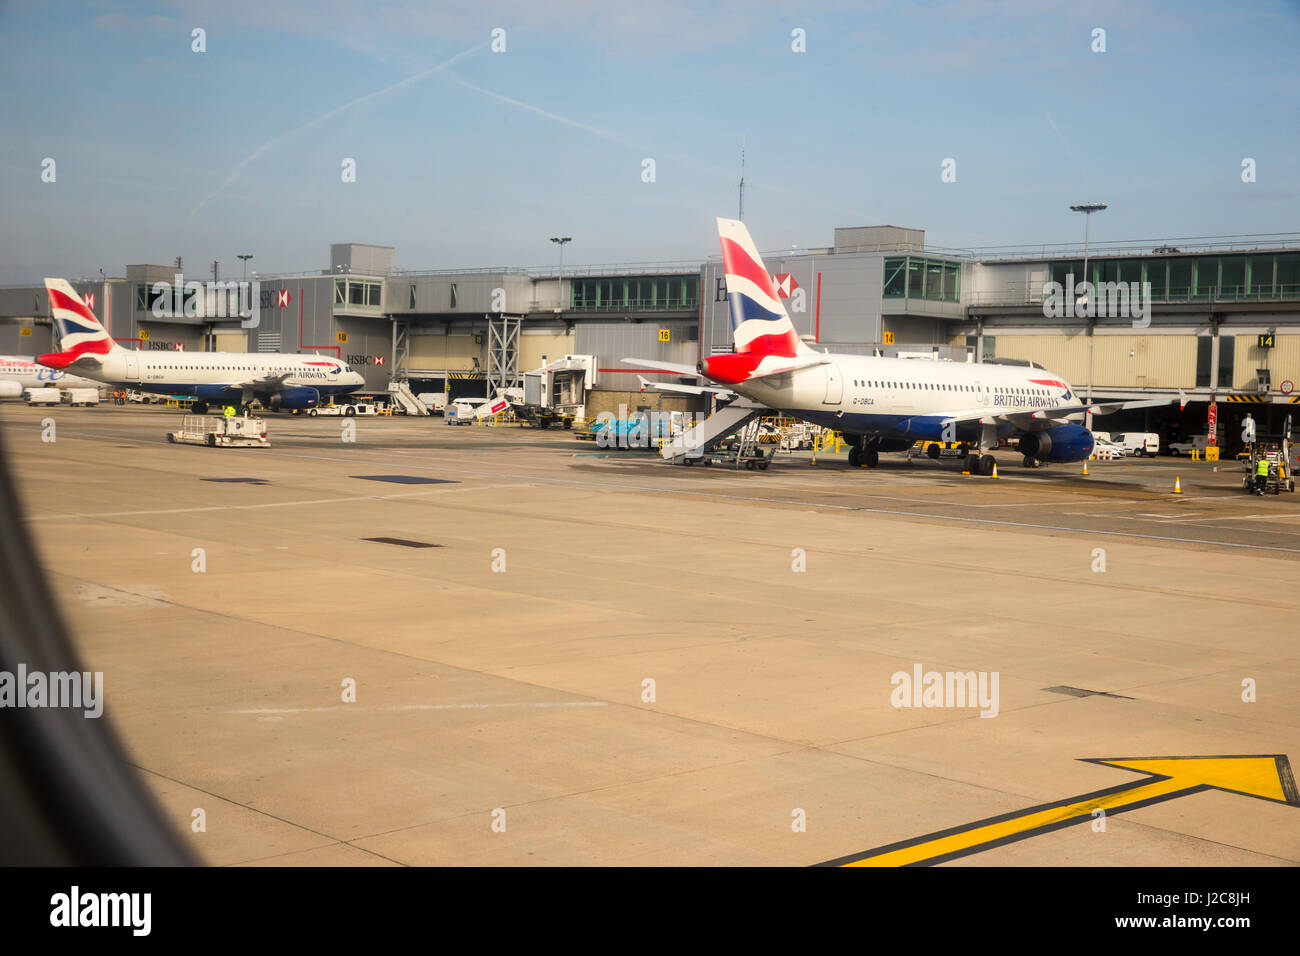 View of British Airways aircraft at the hangers at Gatwick airport prior to take off.View from an airplane that has commenced taxiing on the runway Stock Photo